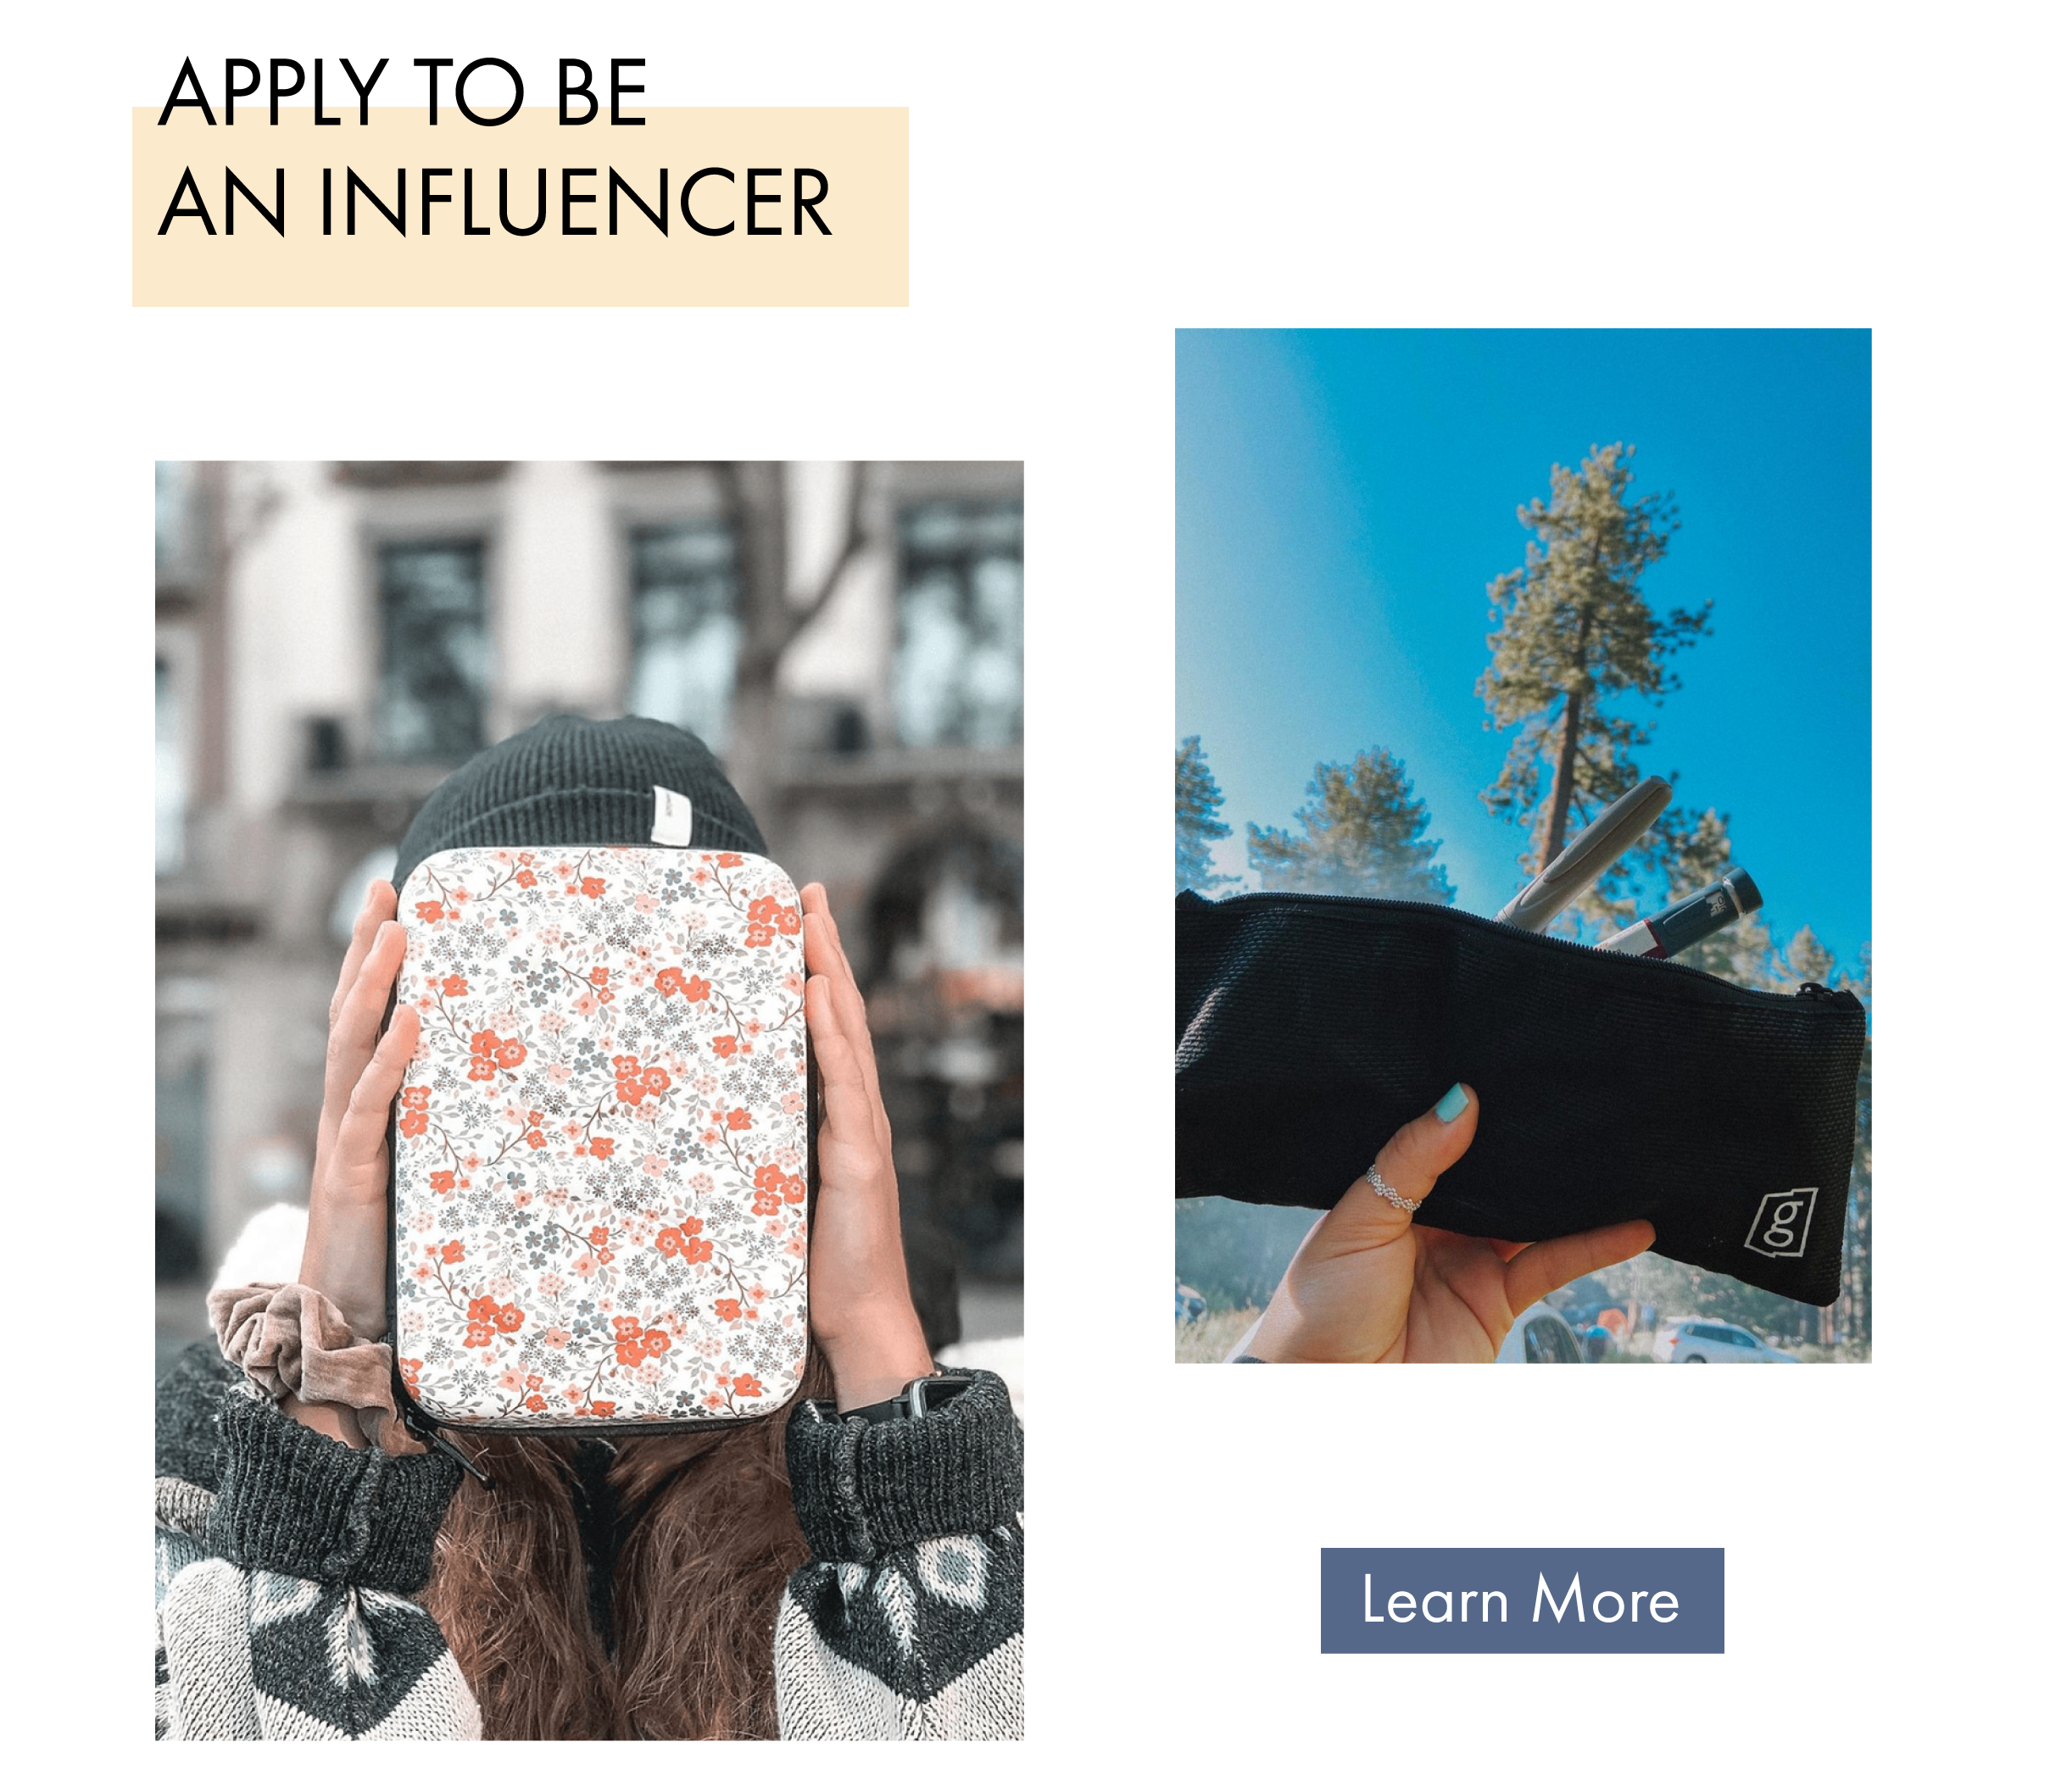 Learn more about influencer program